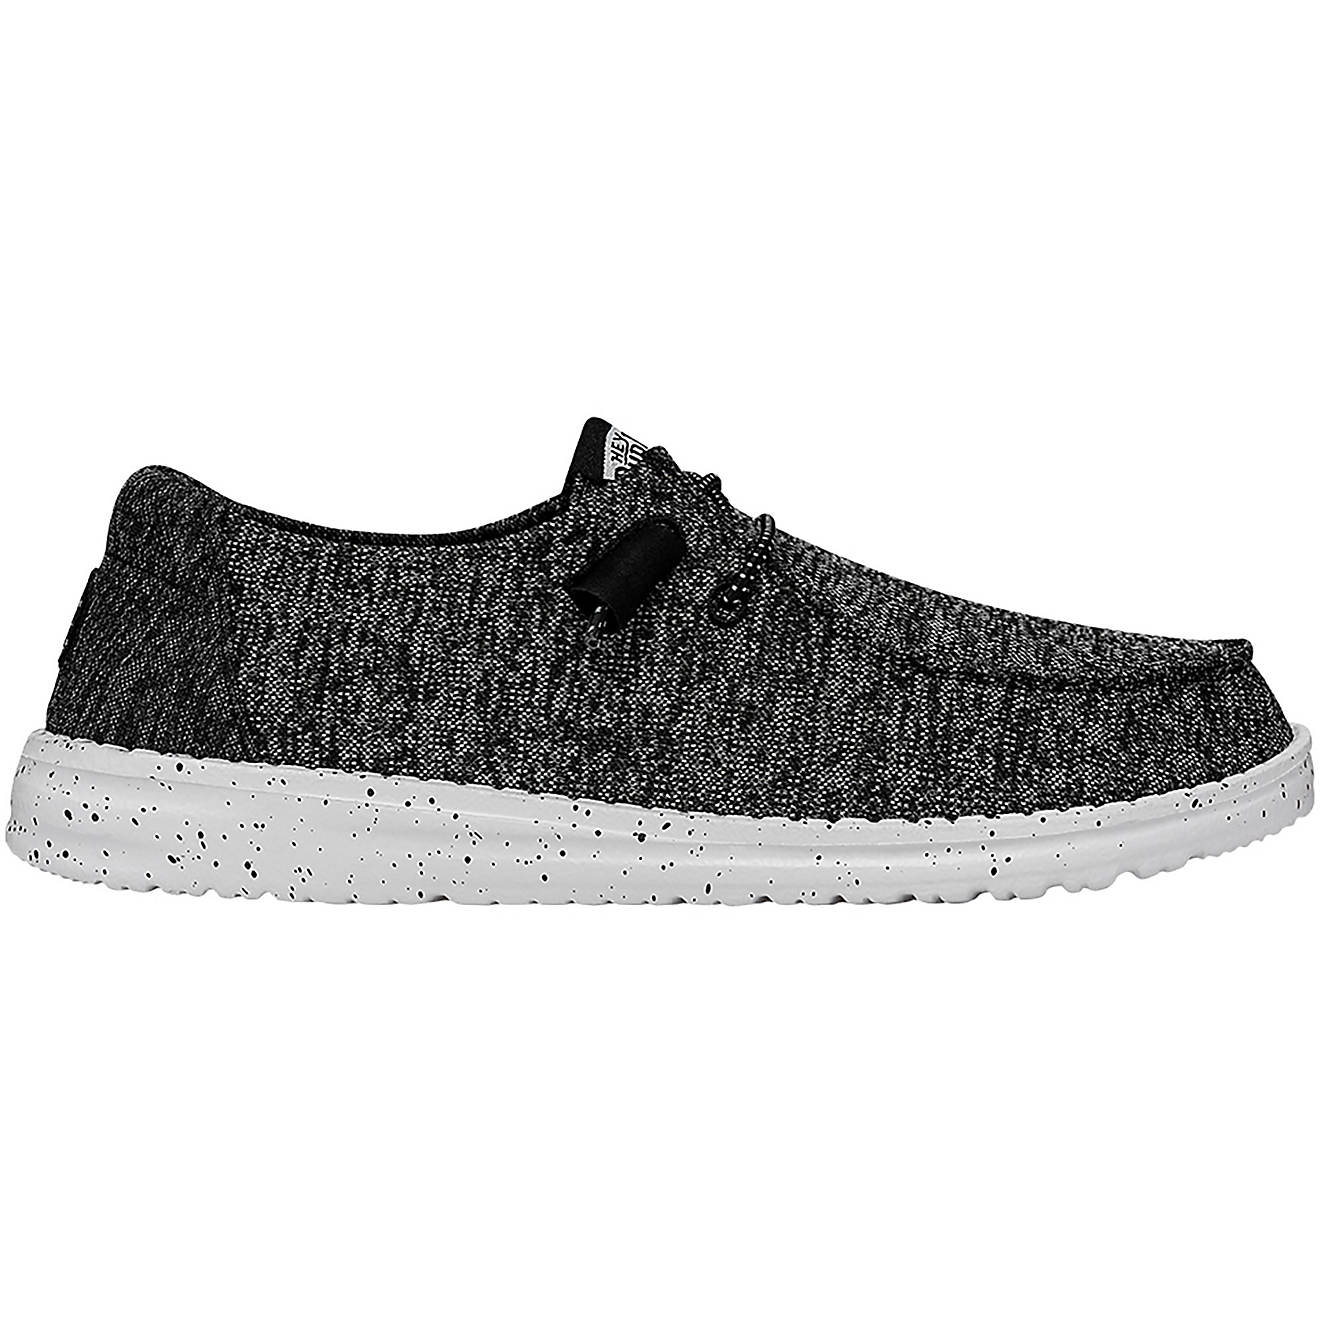 HEYDUDE Women's Wendy Sport Knit Shoes